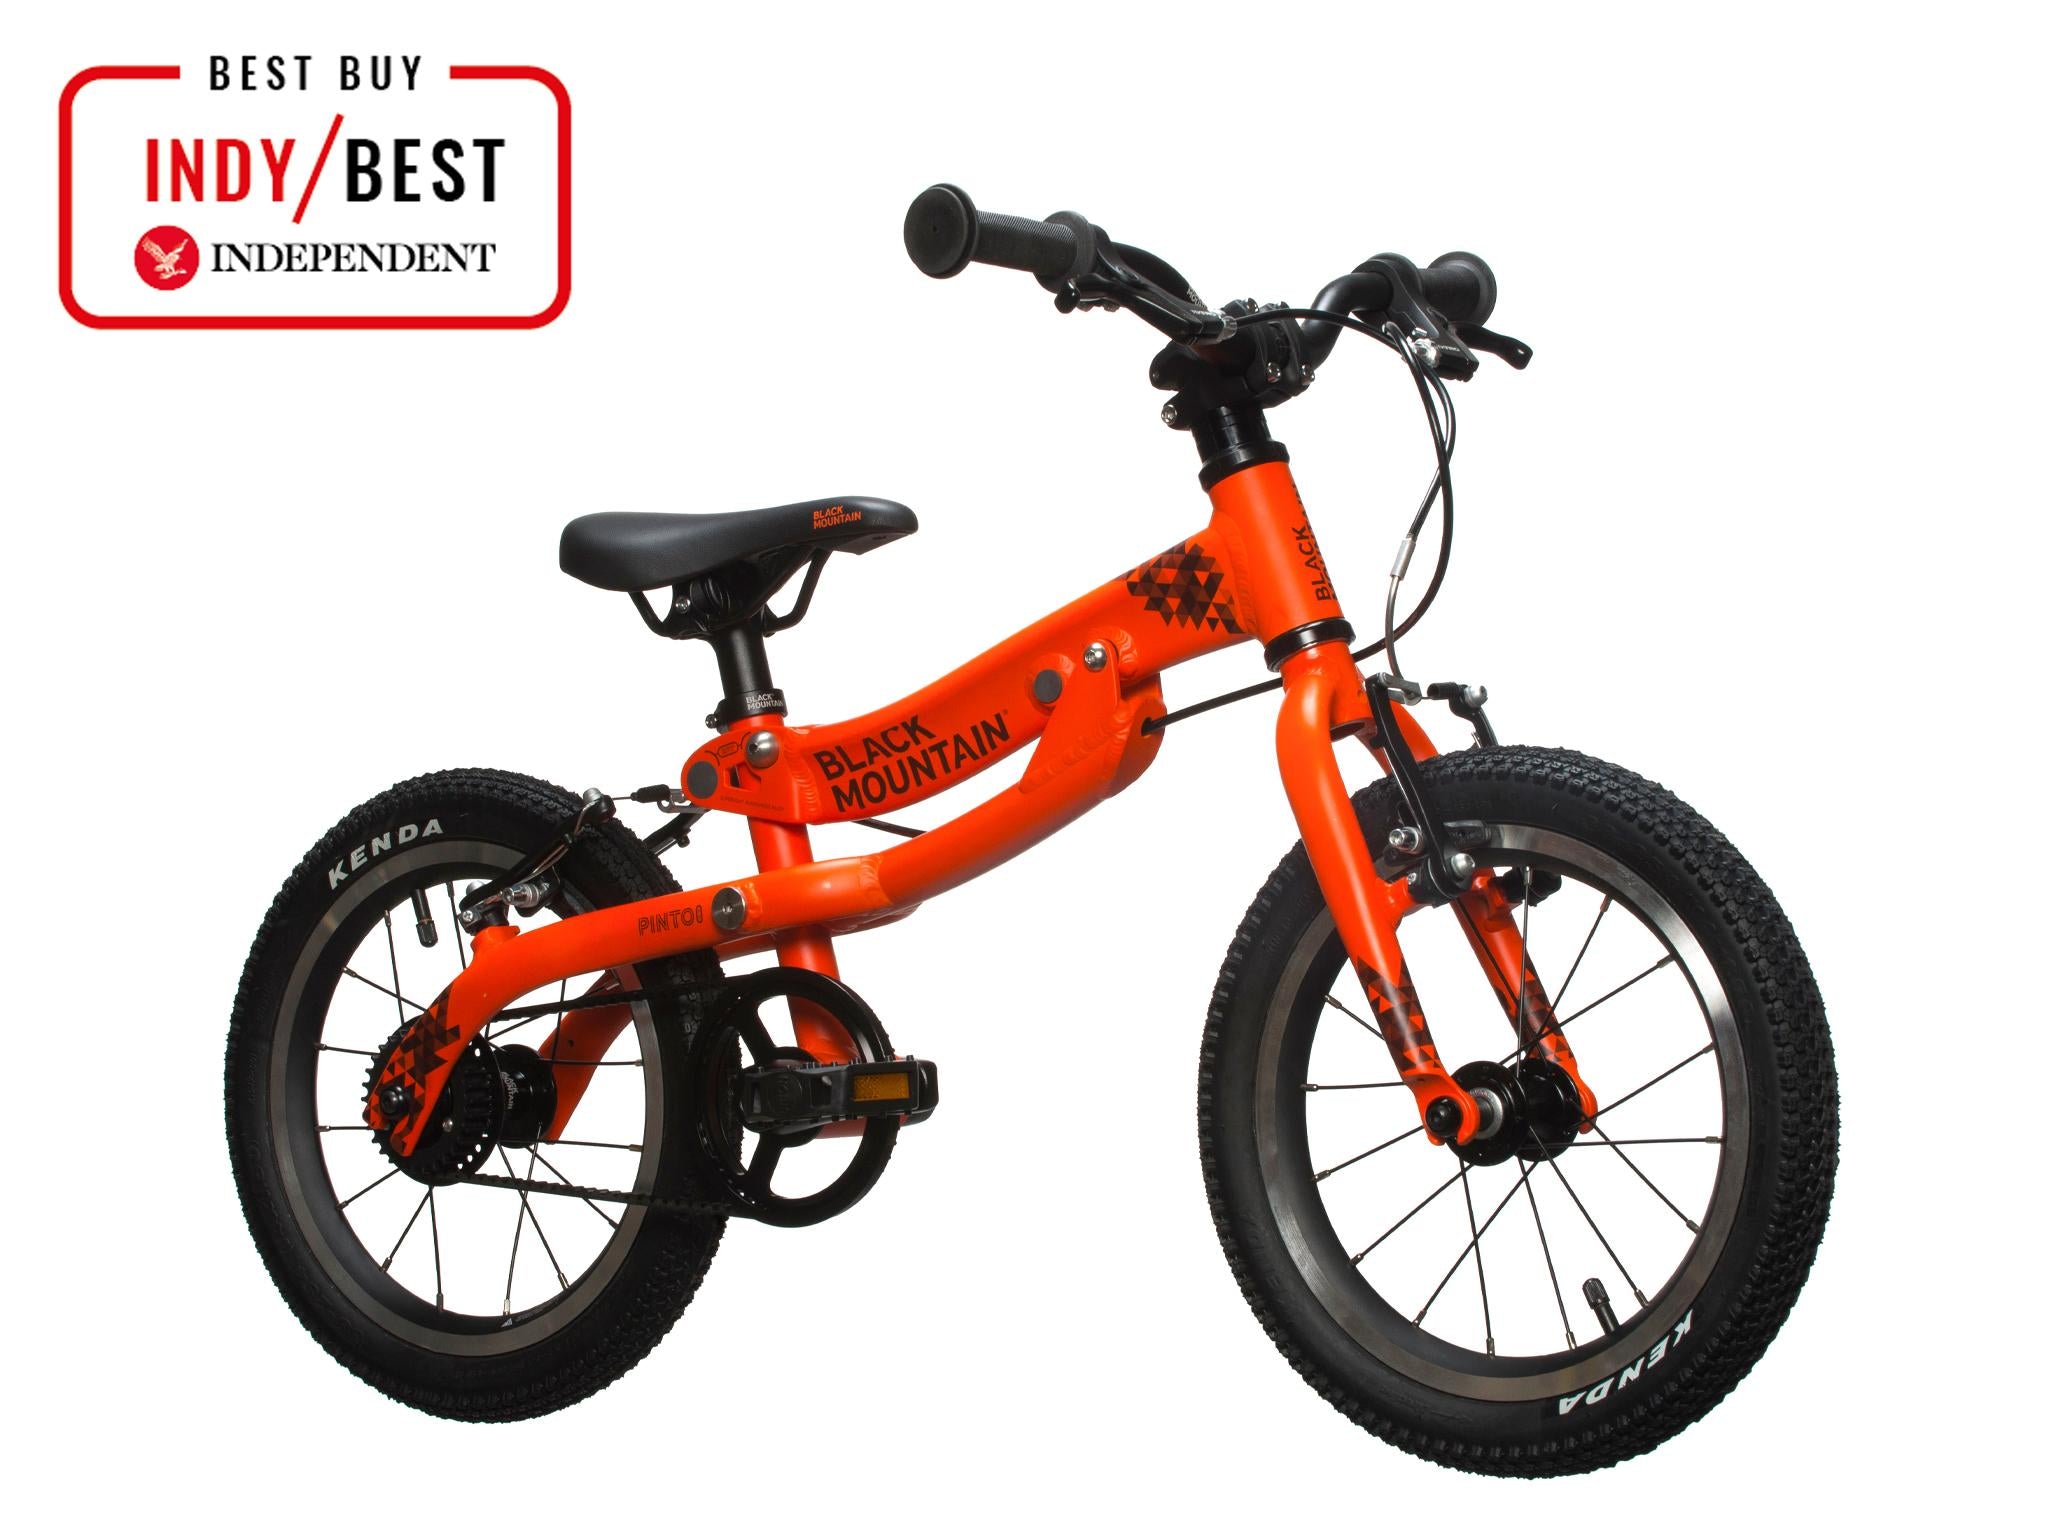 Best balance bike for 2020 awarded by The Independent